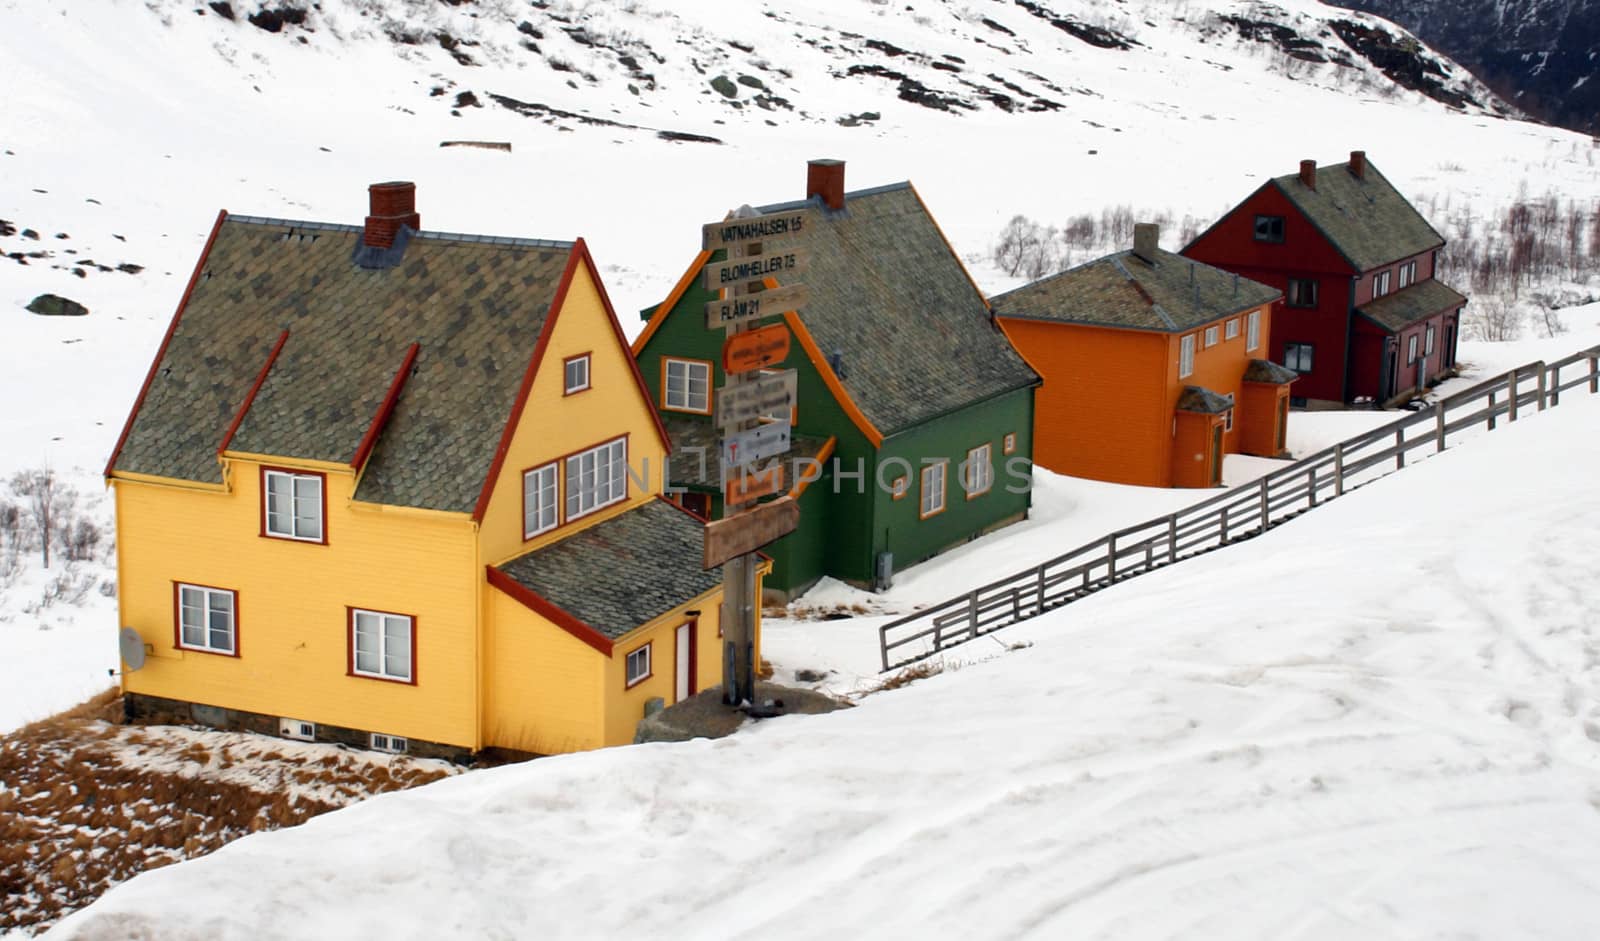 Norway tipical wooden mountain houses, during winter snow season                               